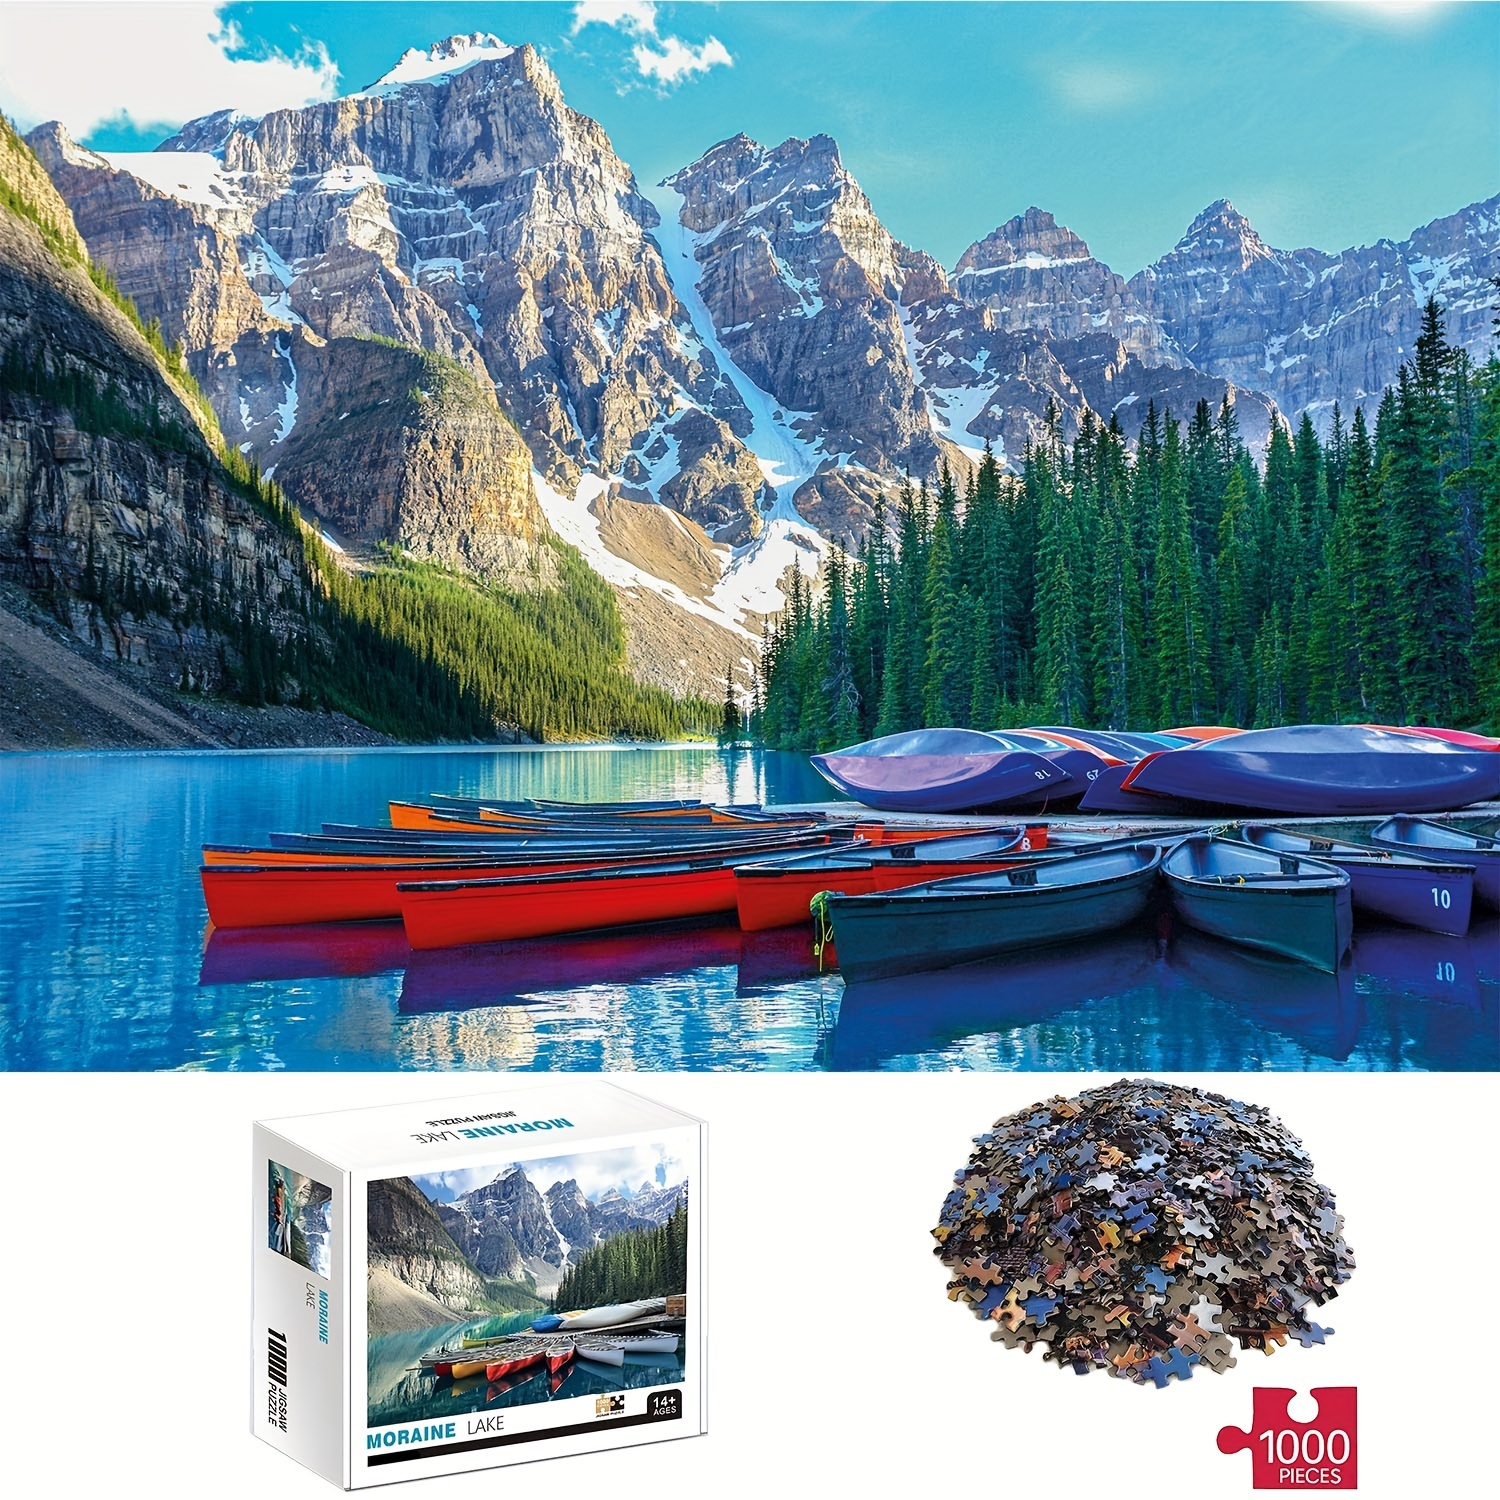 

1000pcs Moraine Lake Puzzles, Thick And Durable Seamless Jigsaw Puzzles For Adults, Fun Family Challenging Puzzles For Birthday, Christmas, Halloween, Thanksgiving, Easter